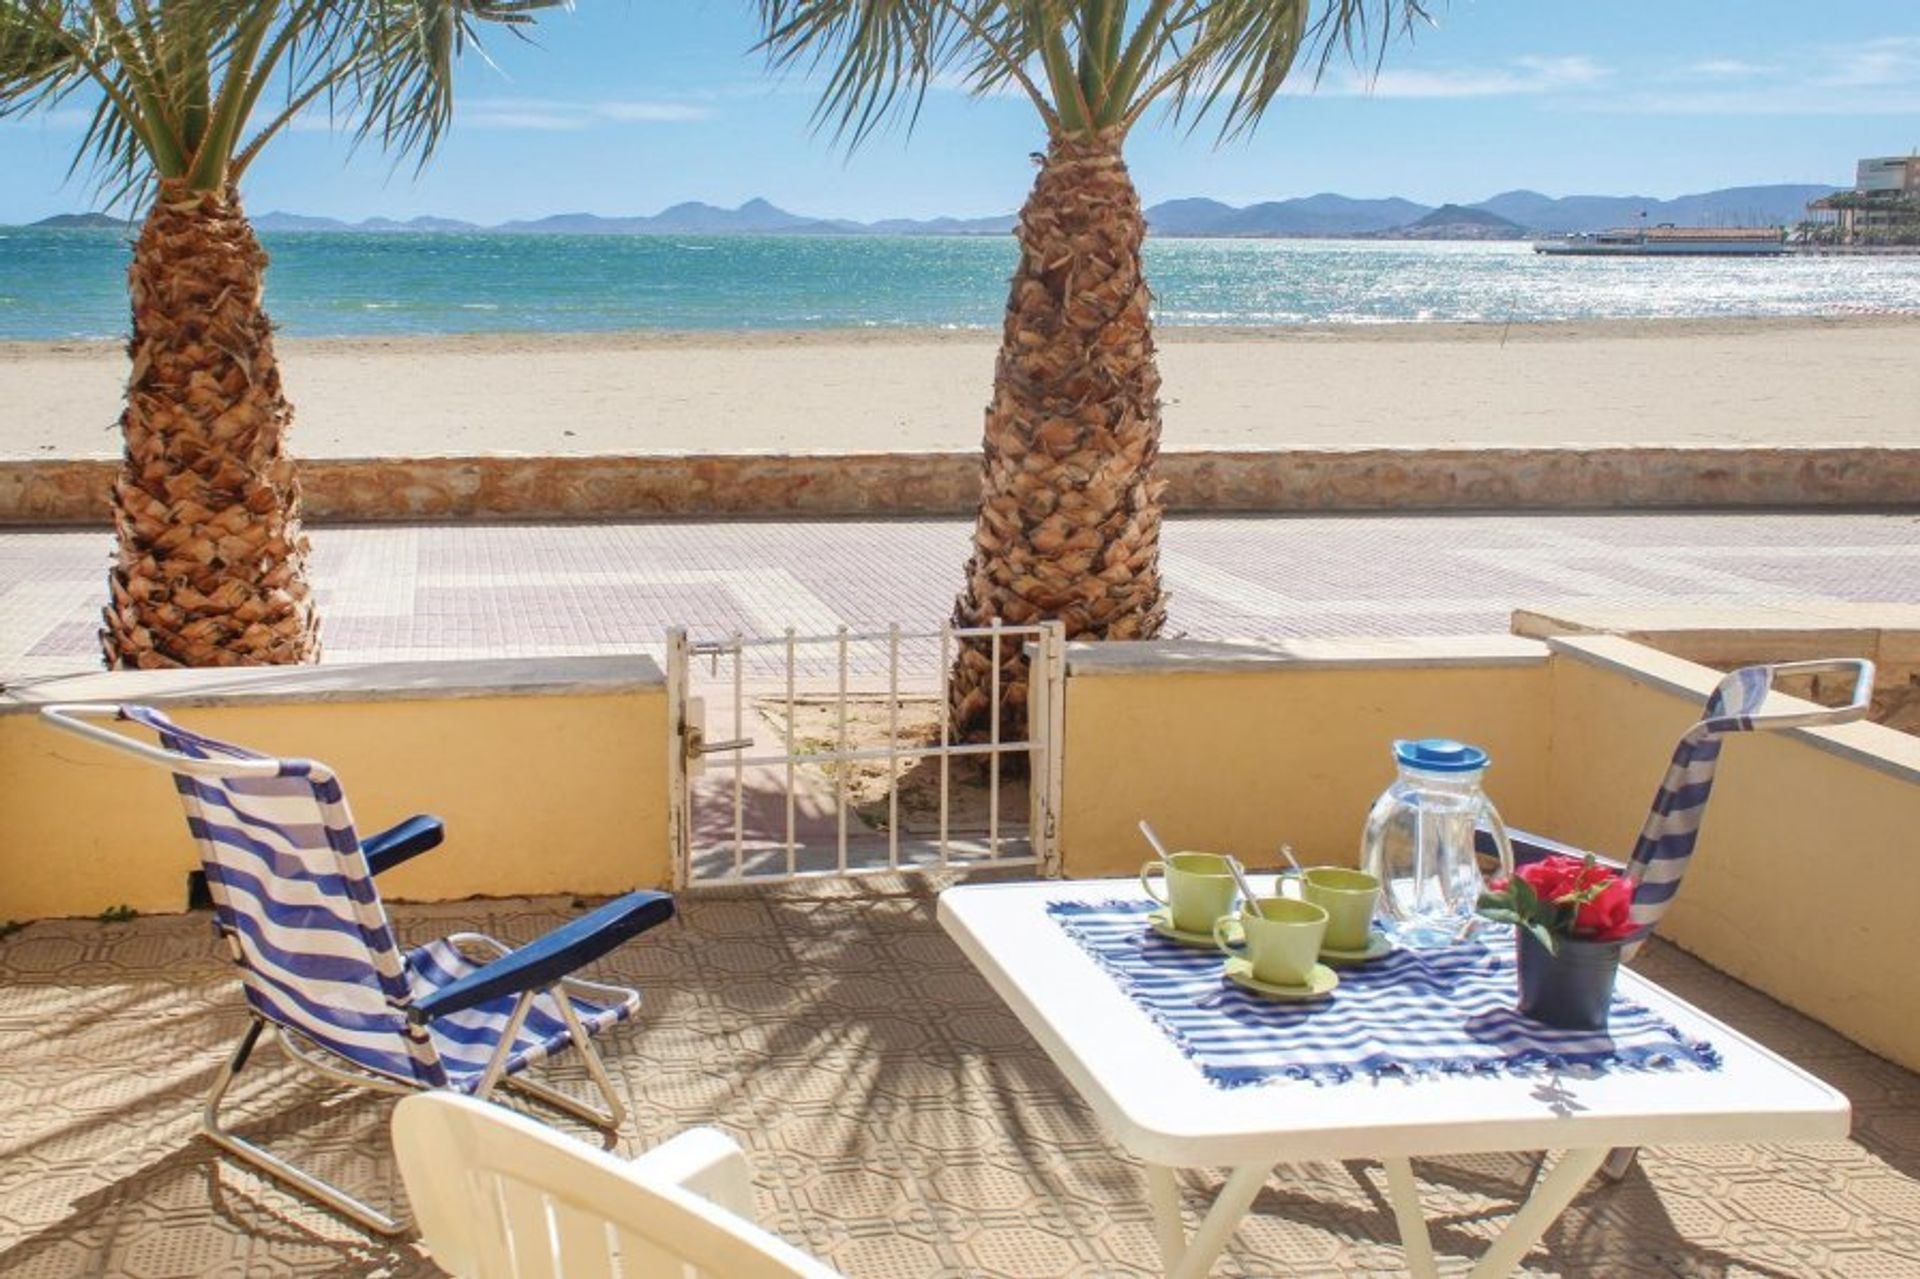 Our beachfront villas in Los Alcazares put you in the heart of it all!